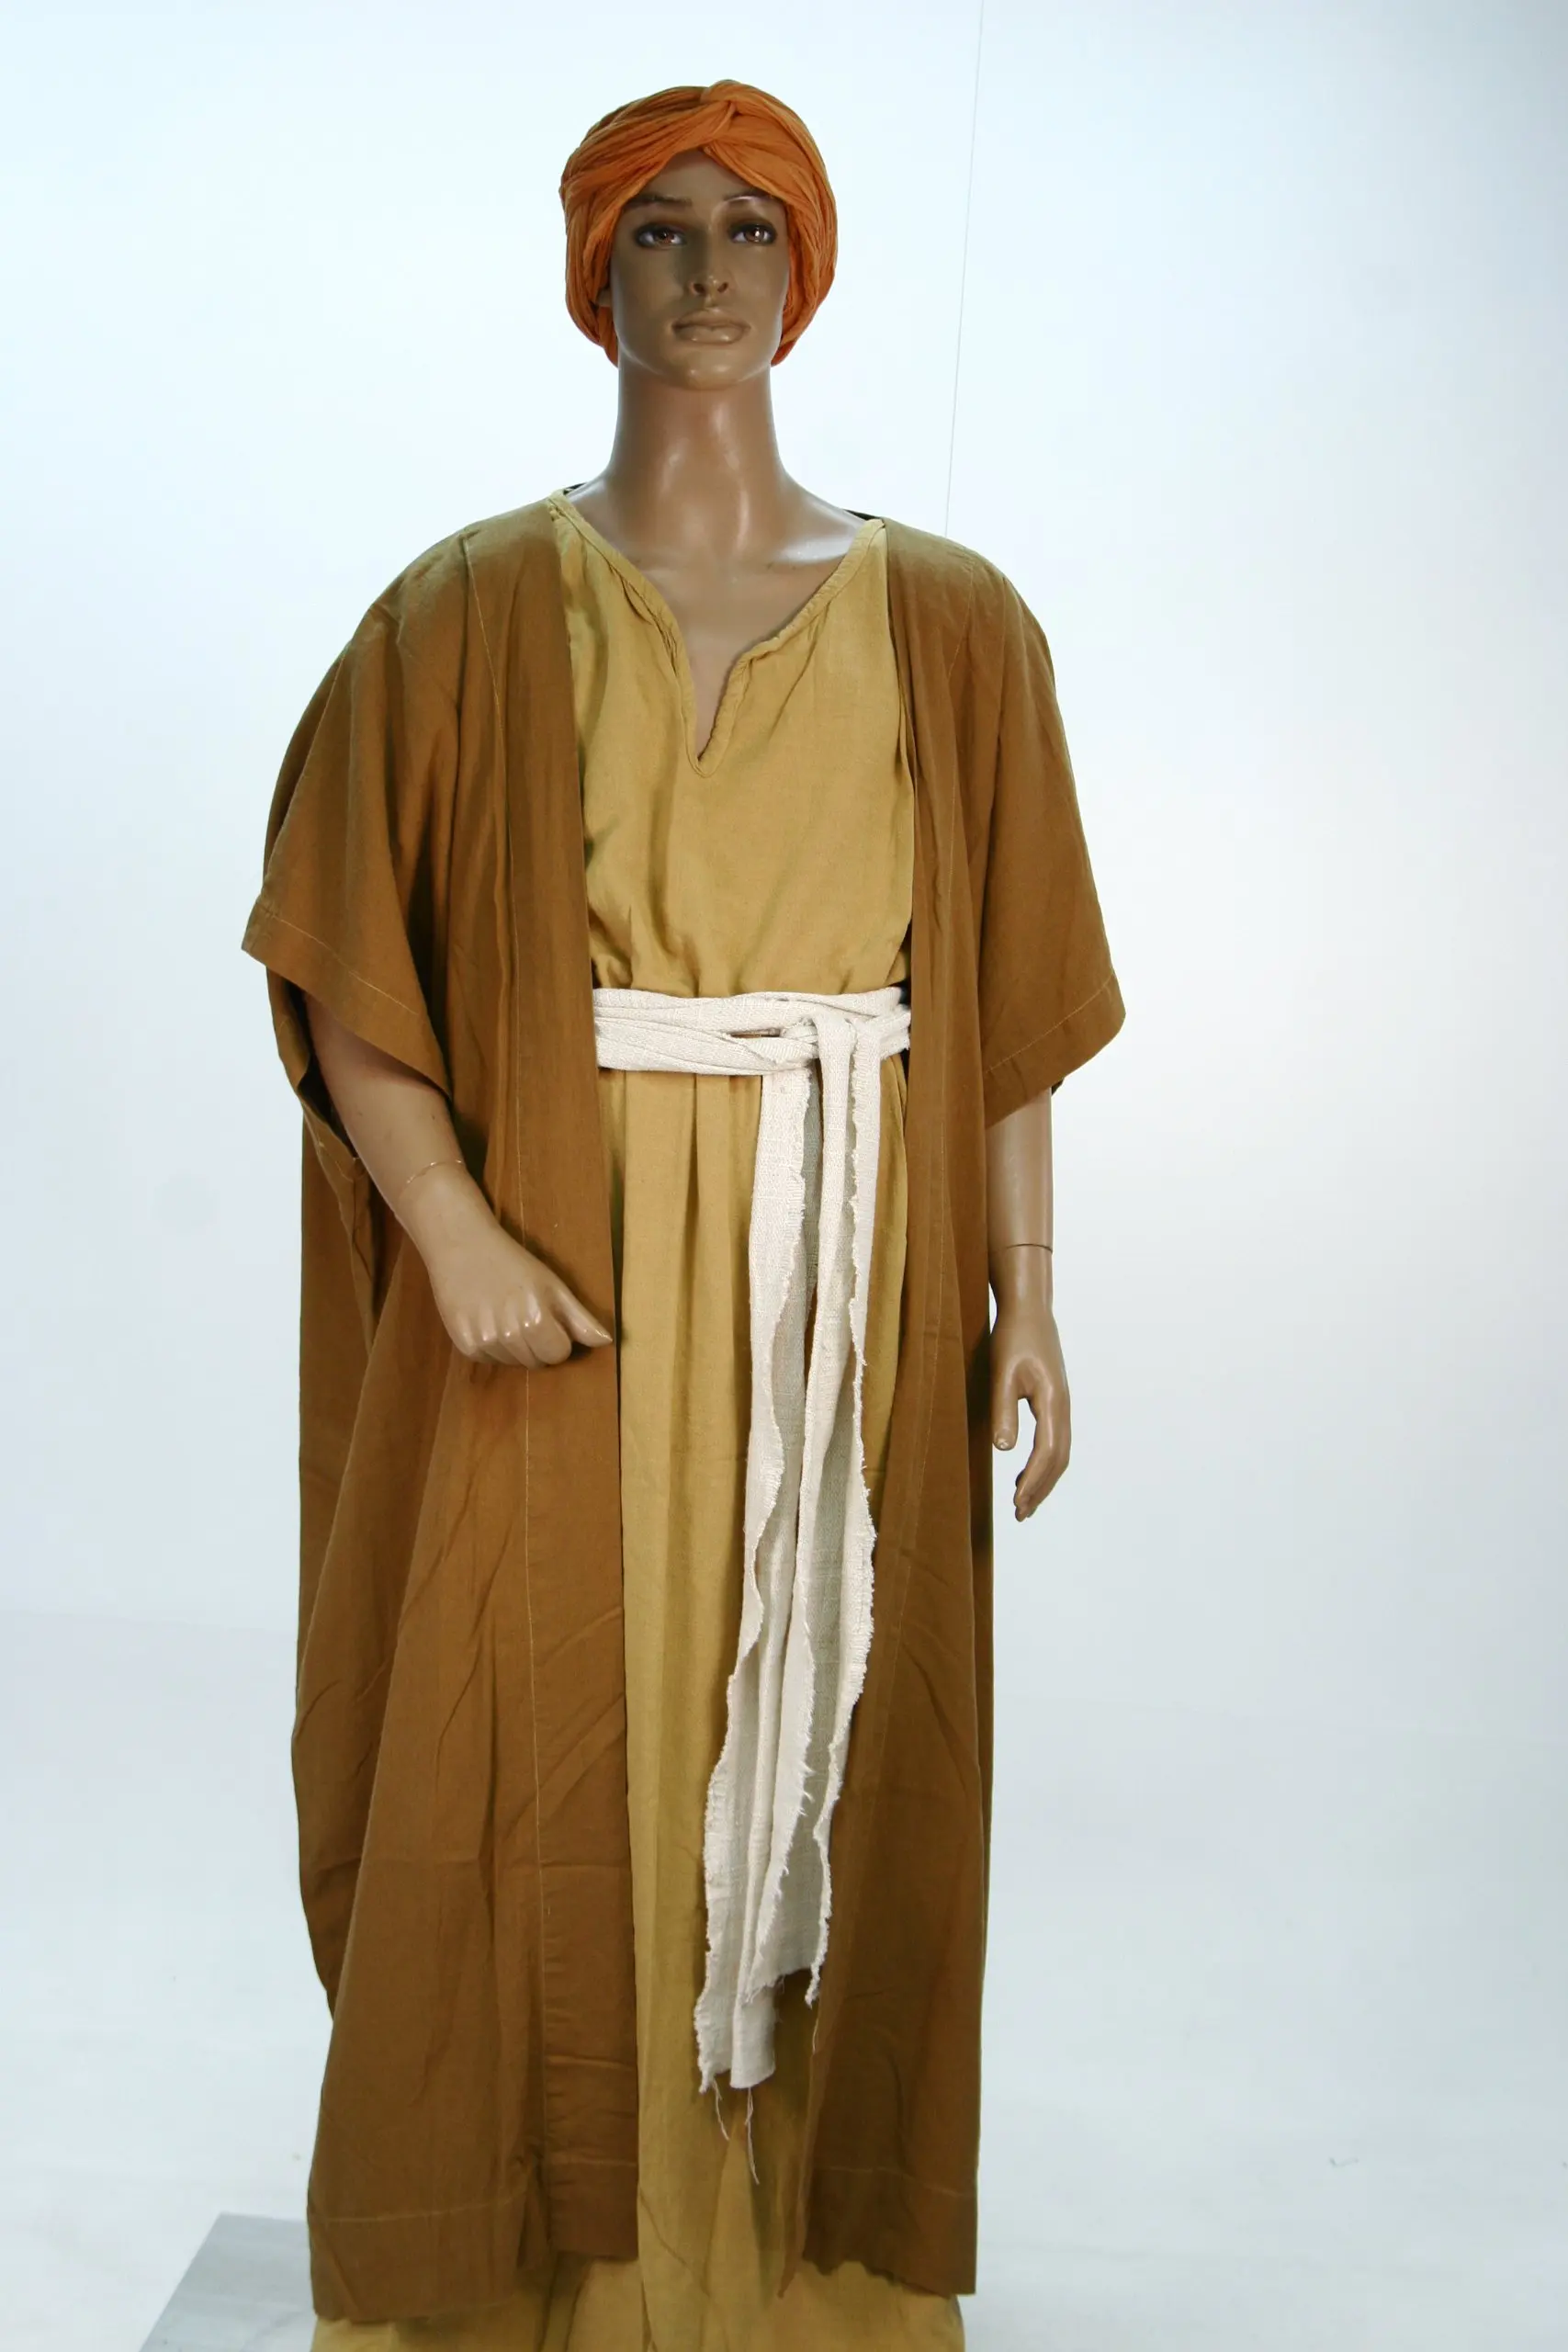 Cheap Egyptian Tunic, find Egyptian Tunic deals on line at Alibaba.com